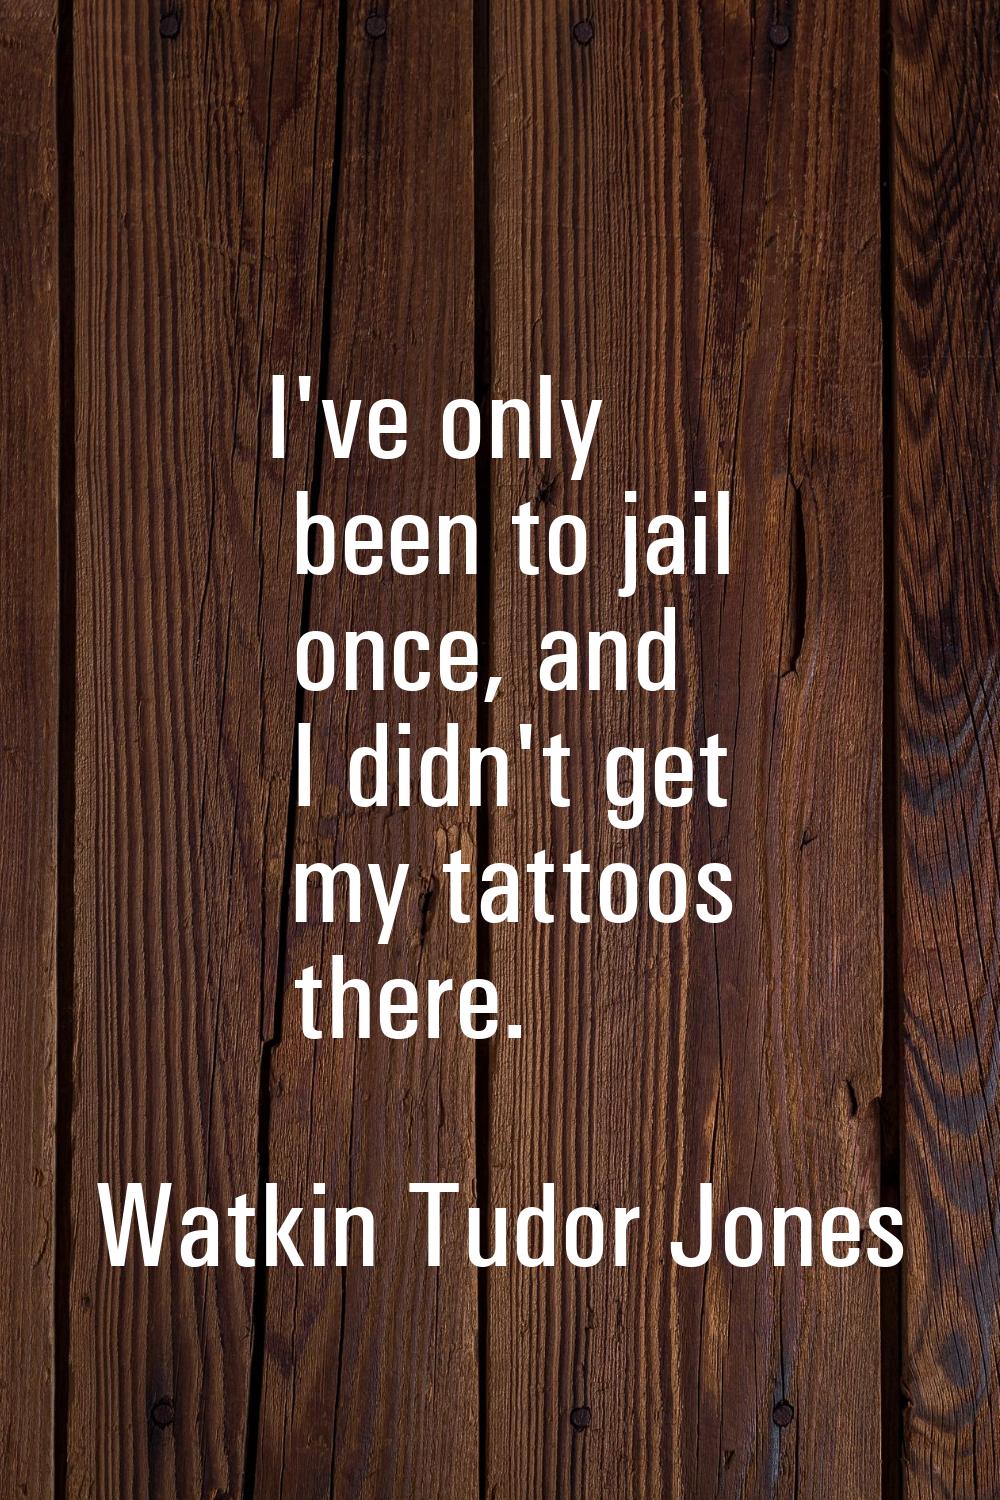 I've only been to jail once, and I didn't get my tattoos there.